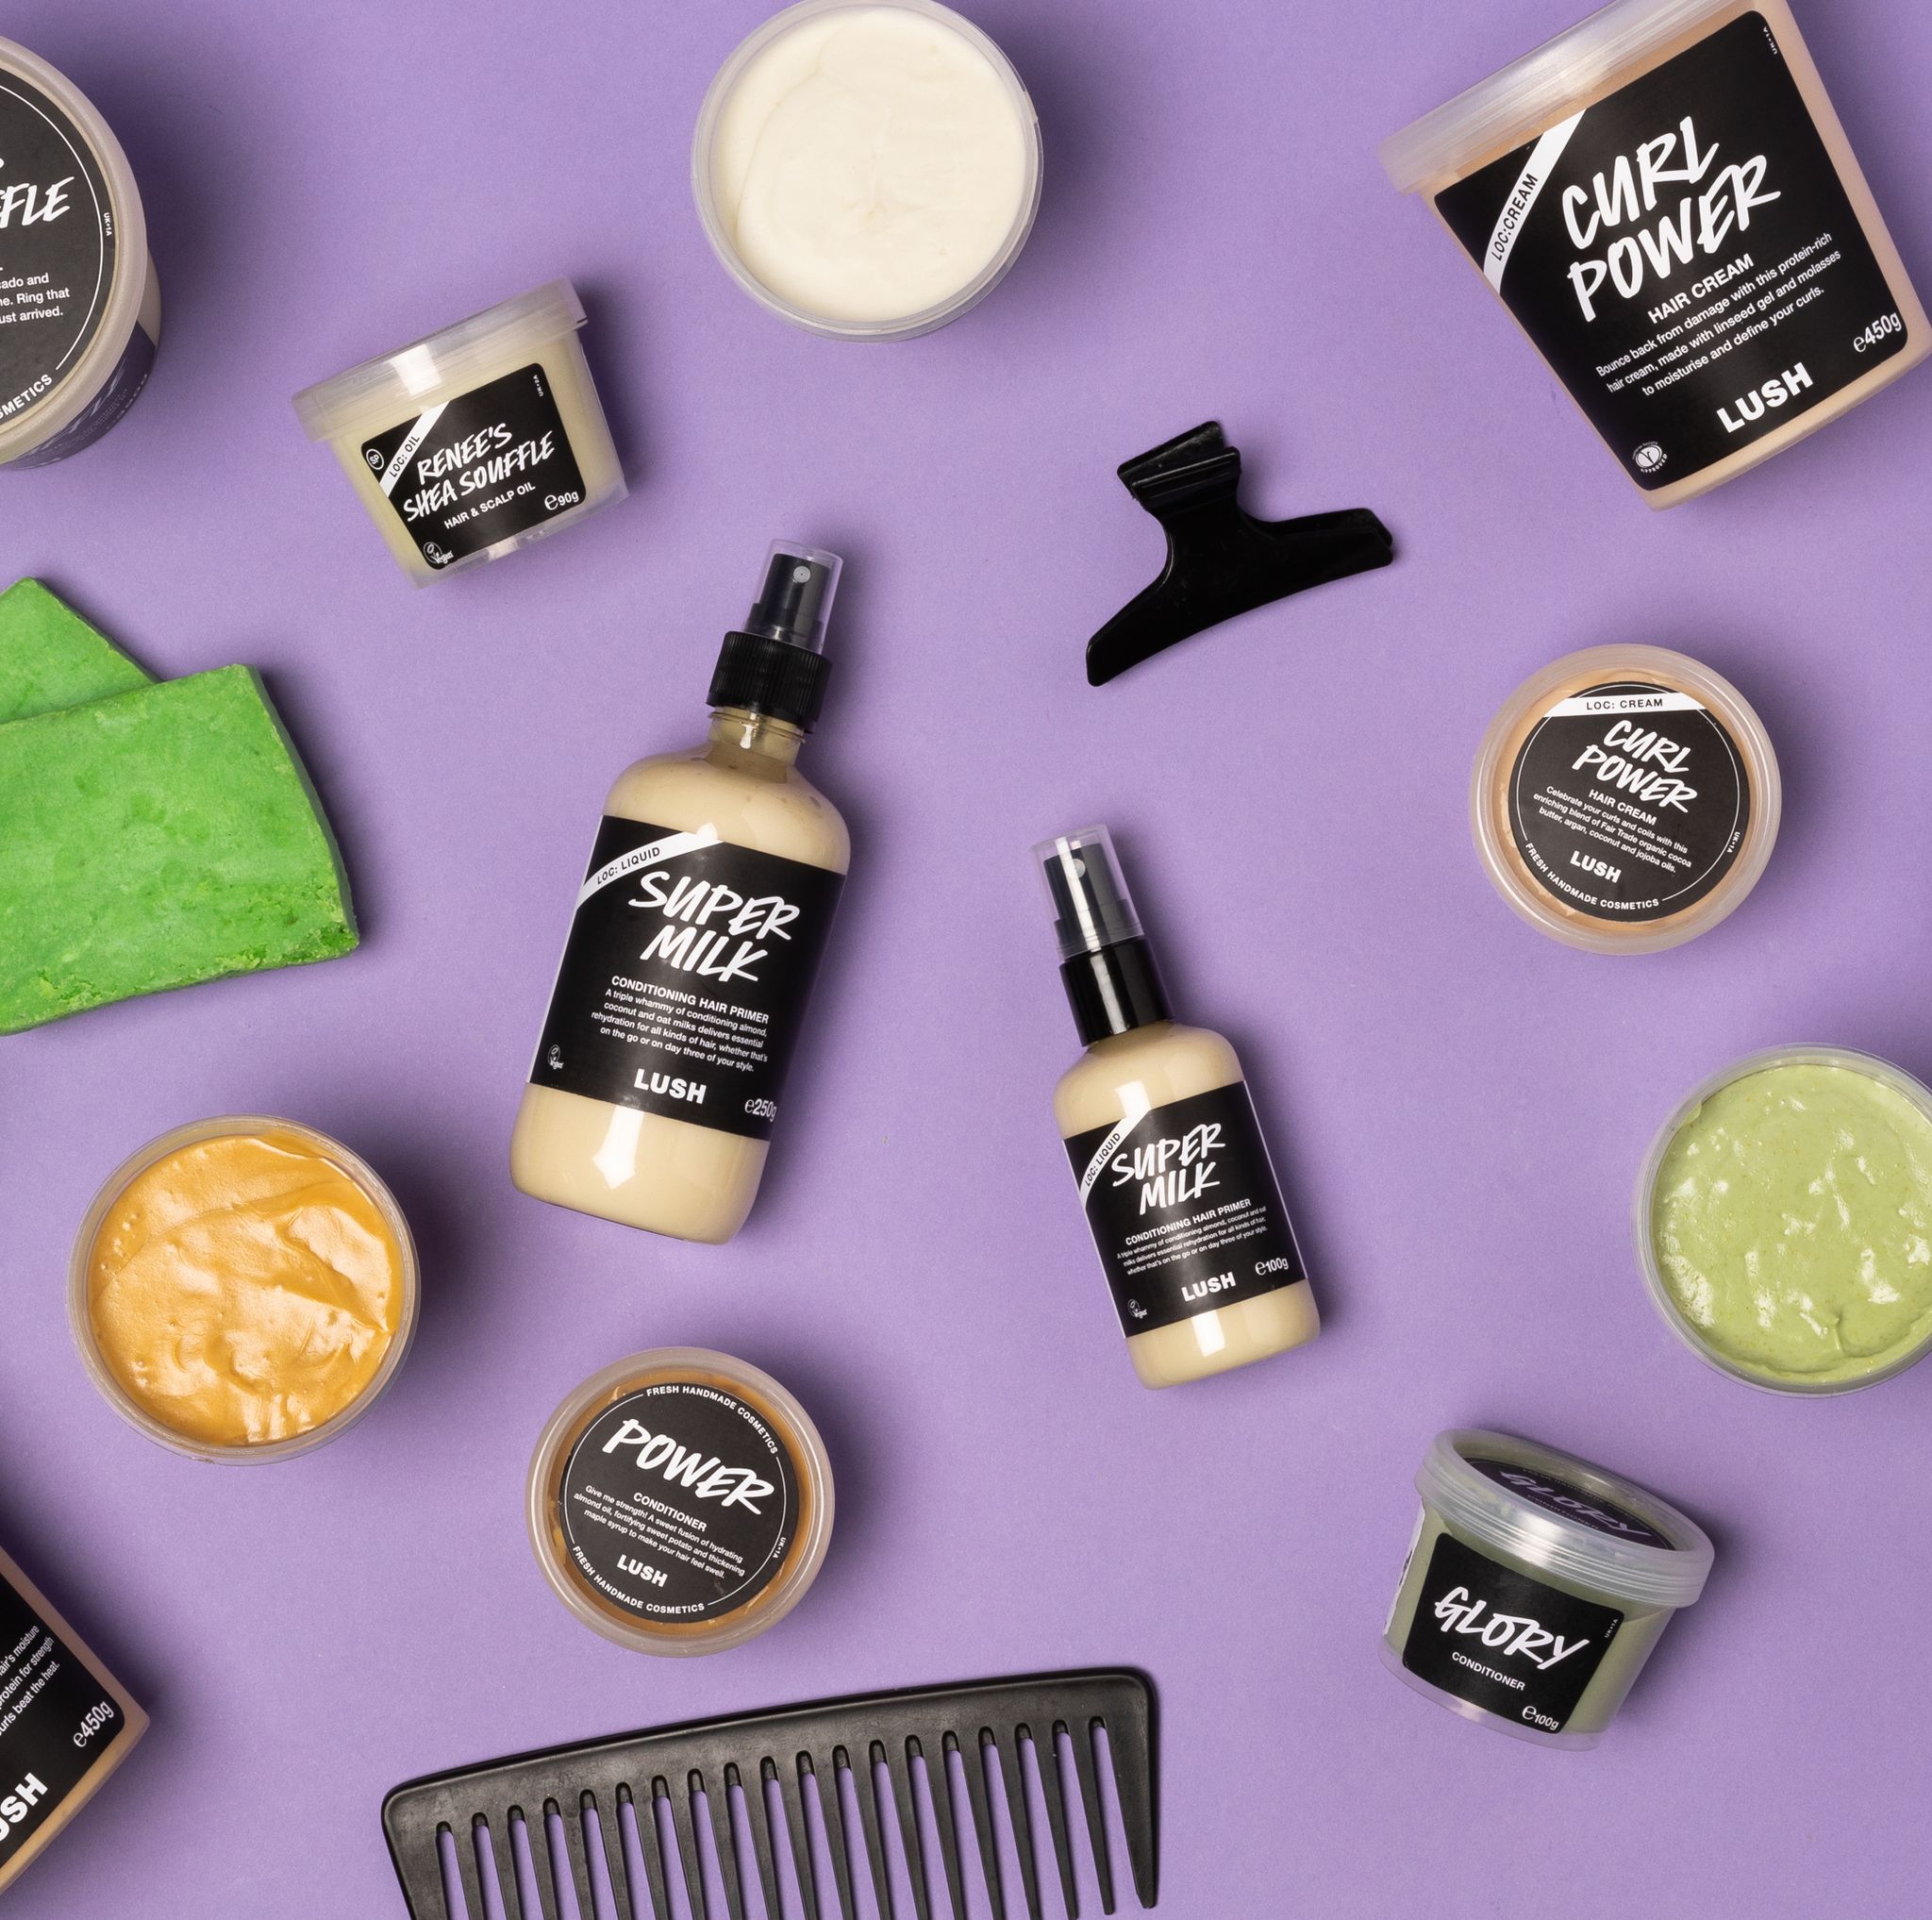 Lush has launched a new line of products catering to afro hair